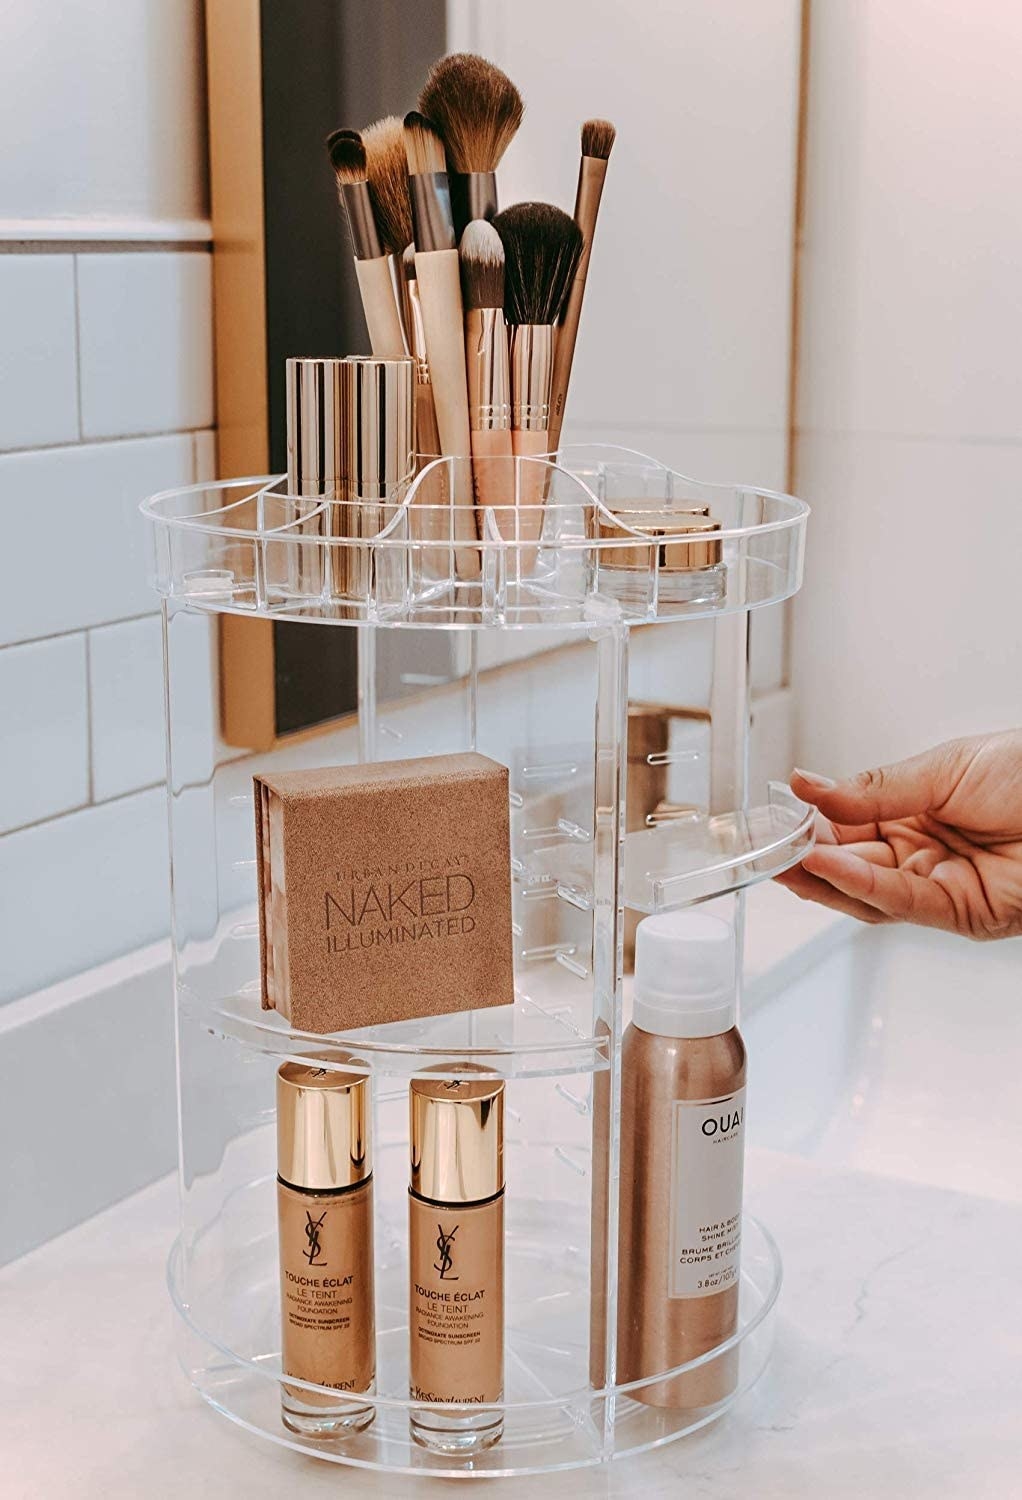 A person pulling out one of the shelving trays on the rotating caddy that is holding various beauty products 